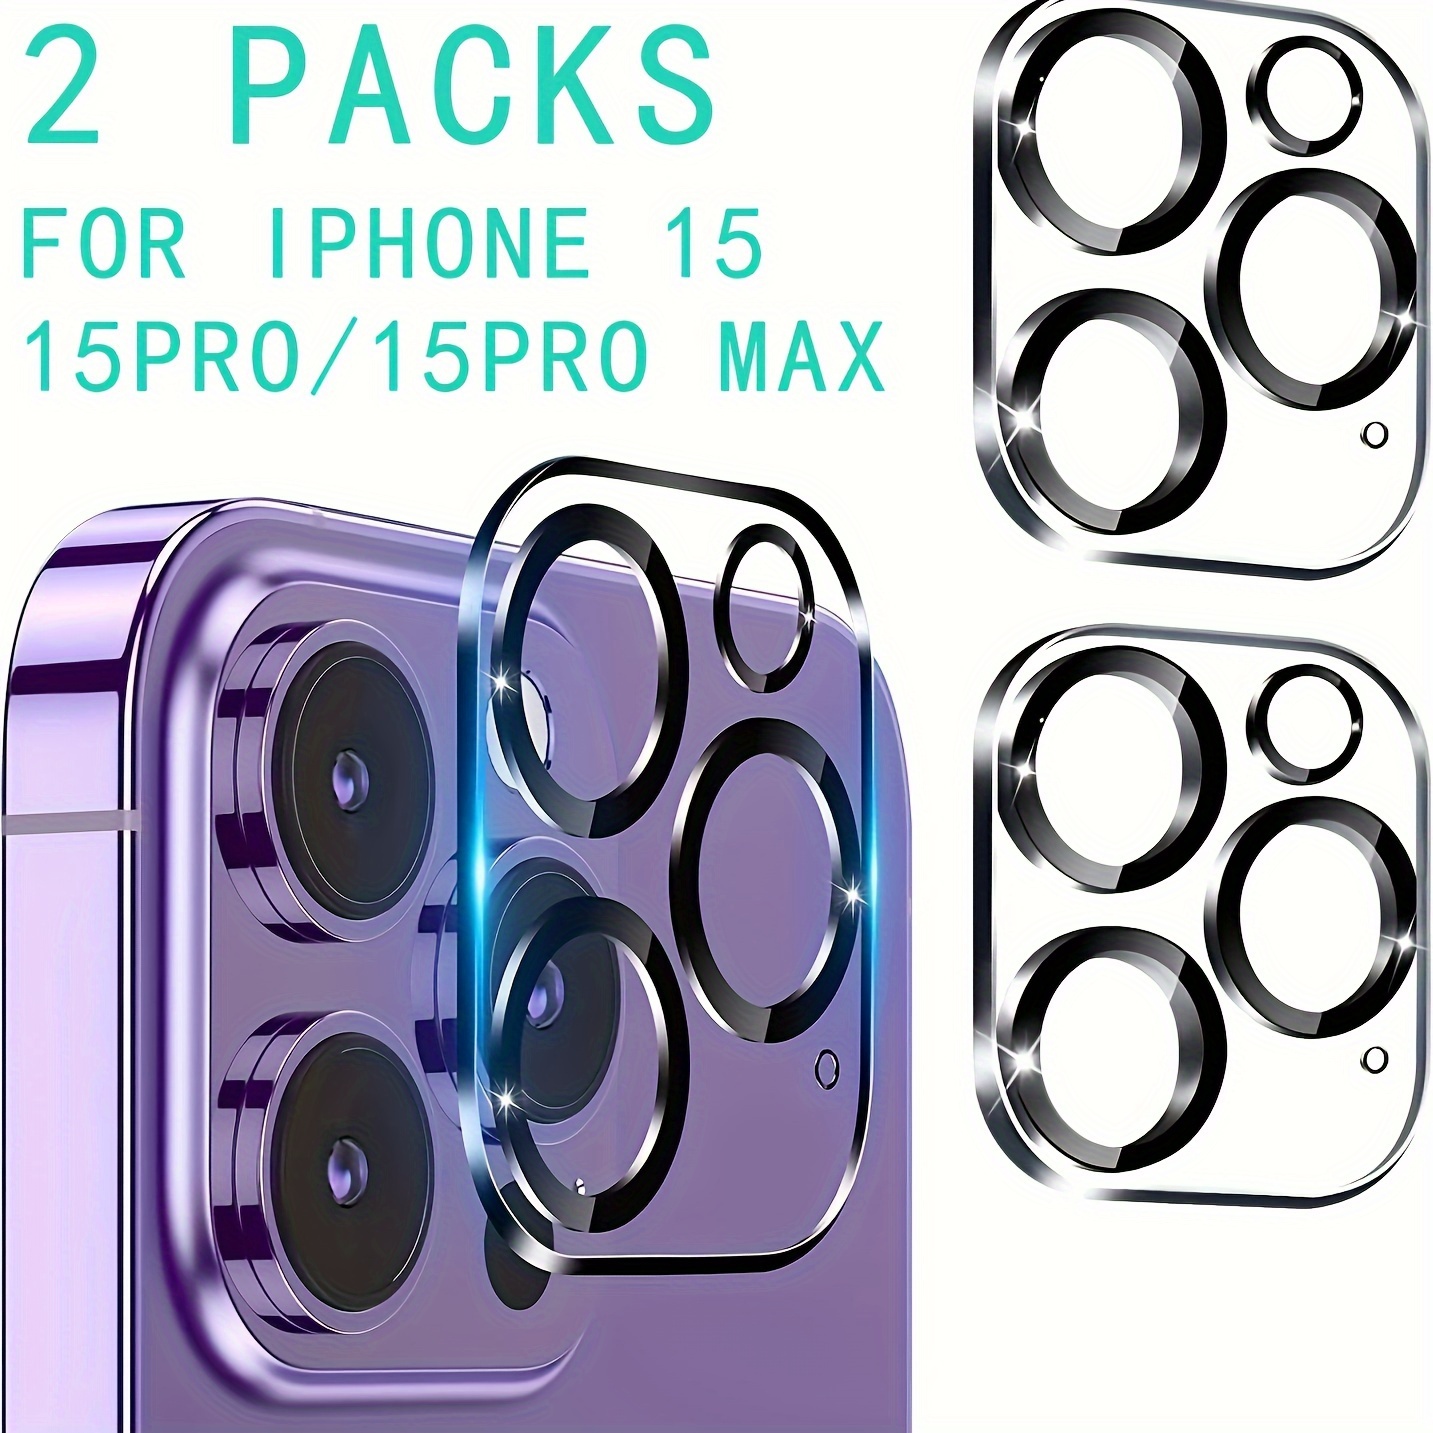 AFARER 2 Pack for iPhone 15 Pro/iPhone 15 Pro Max Camera Lens Protector,  Metal Camera Lens Protector with 9H Tempered Glass Screen Protector